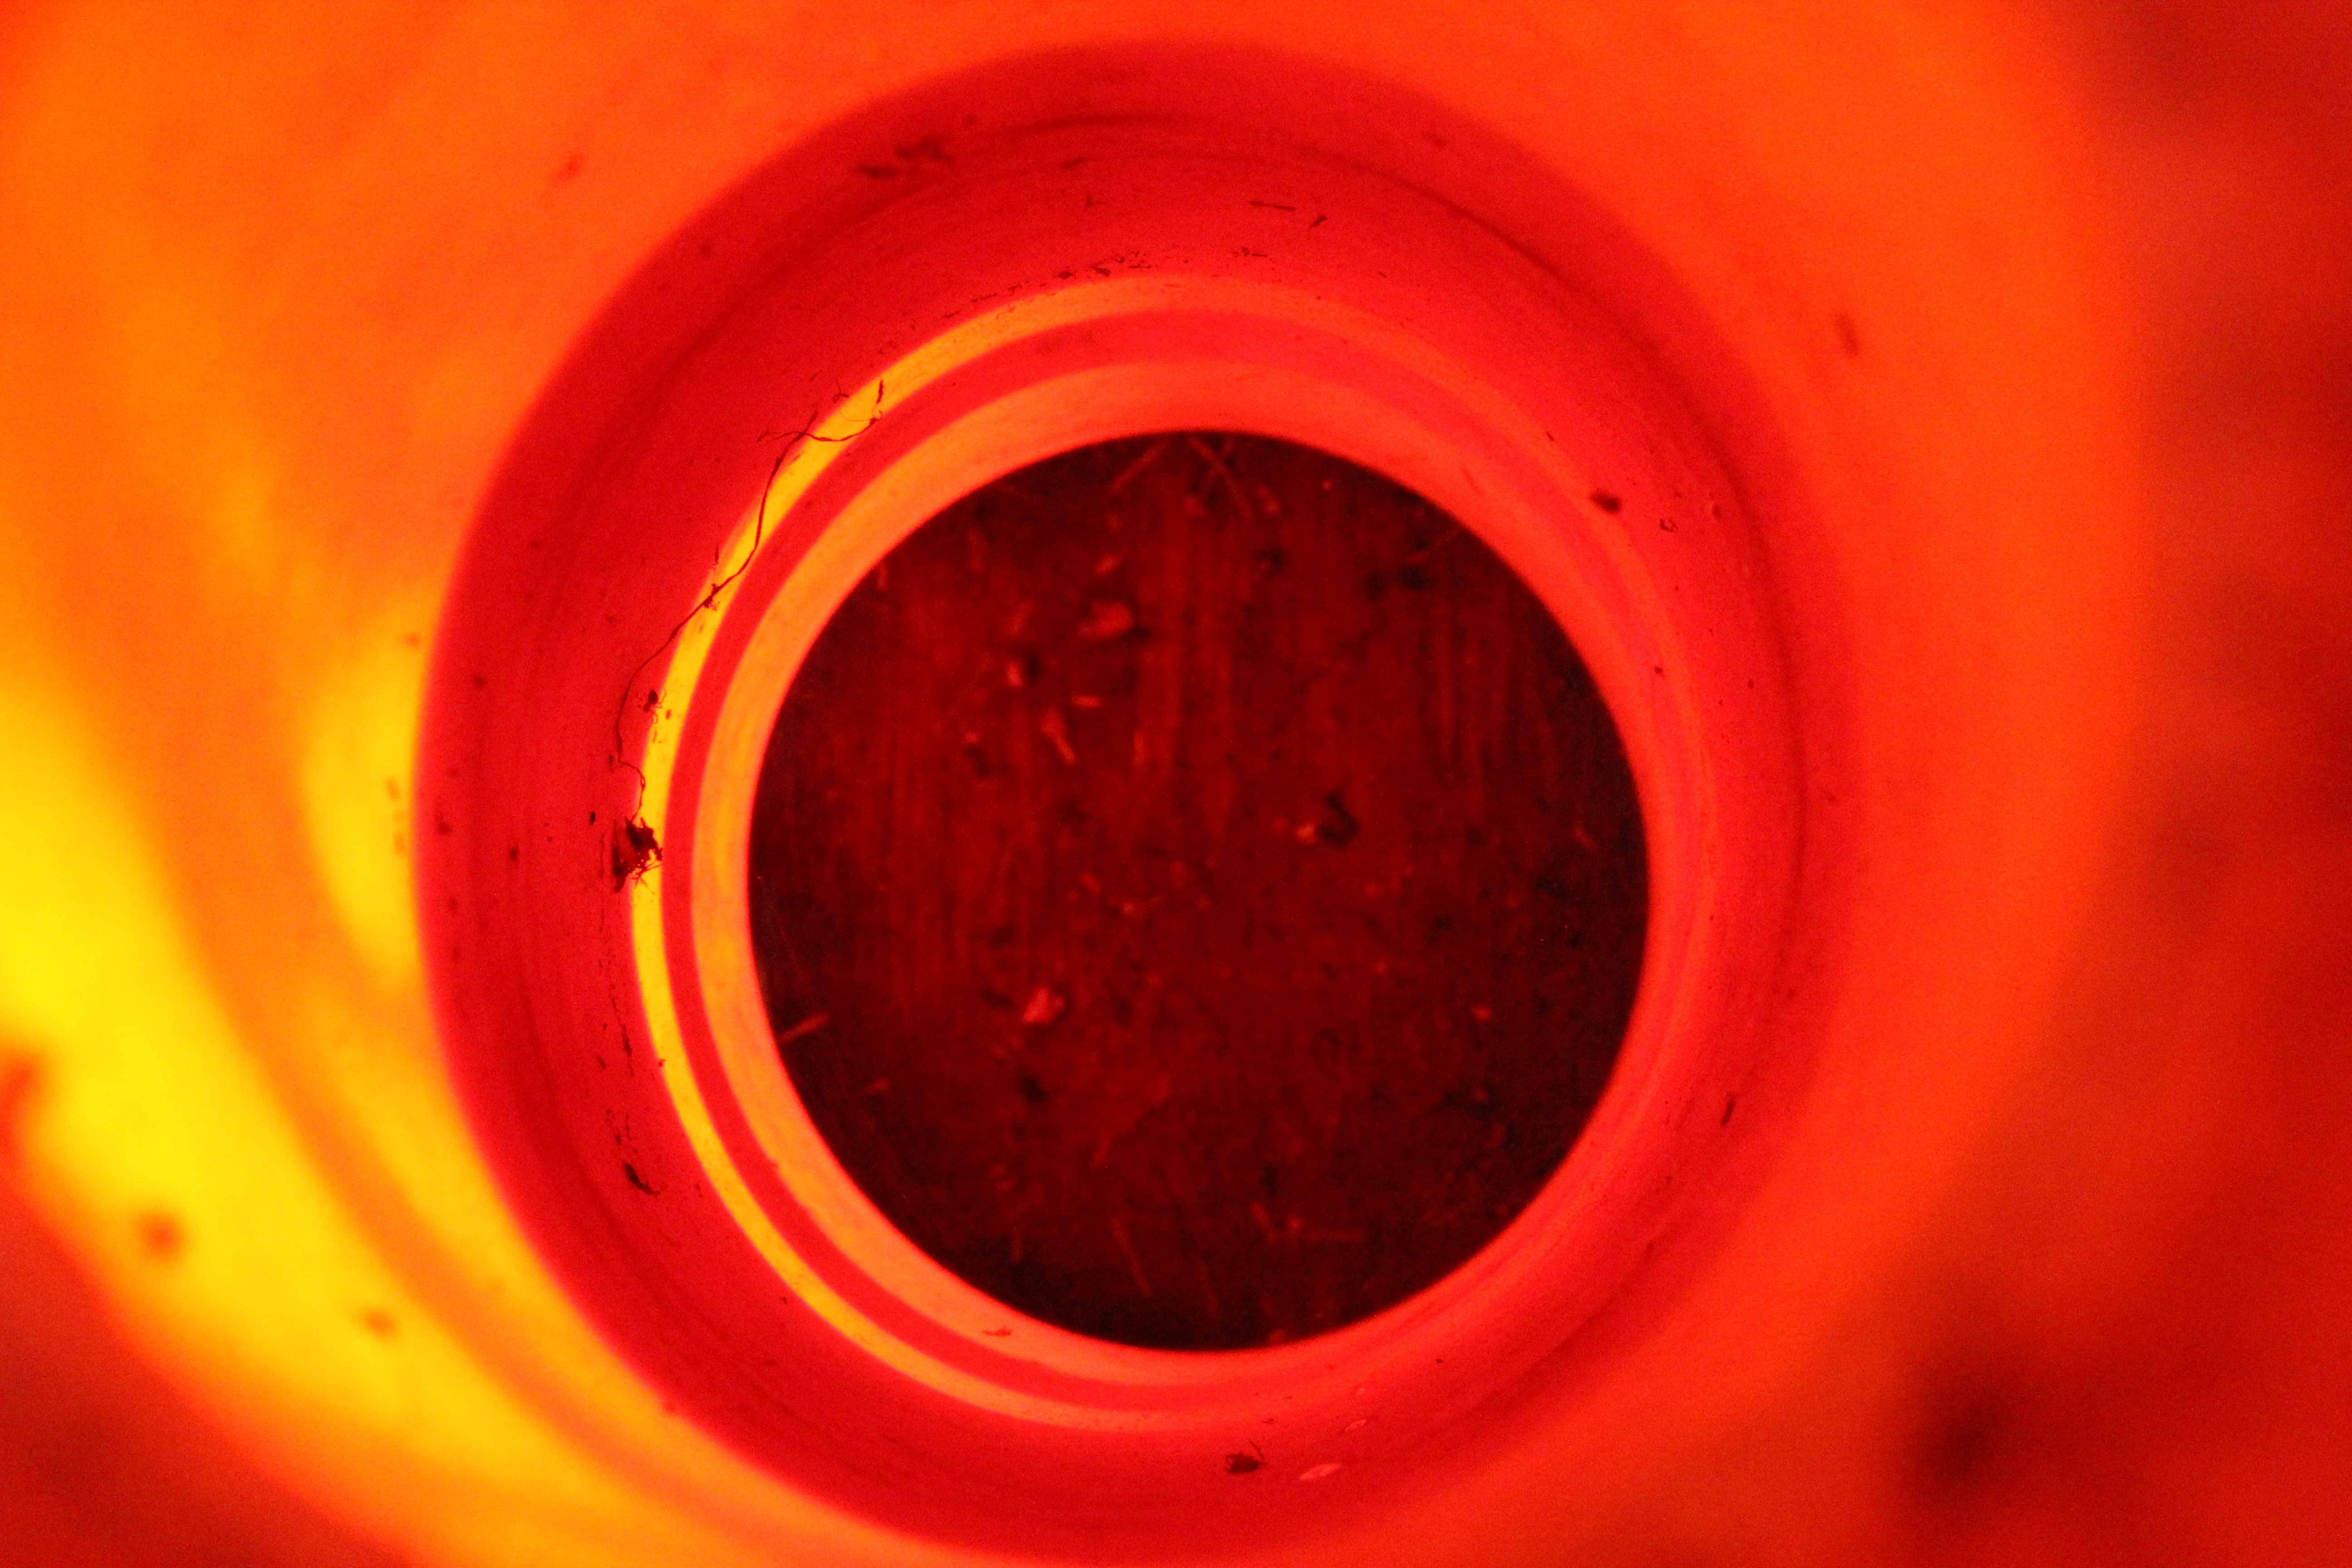 Inside the Safety Cone